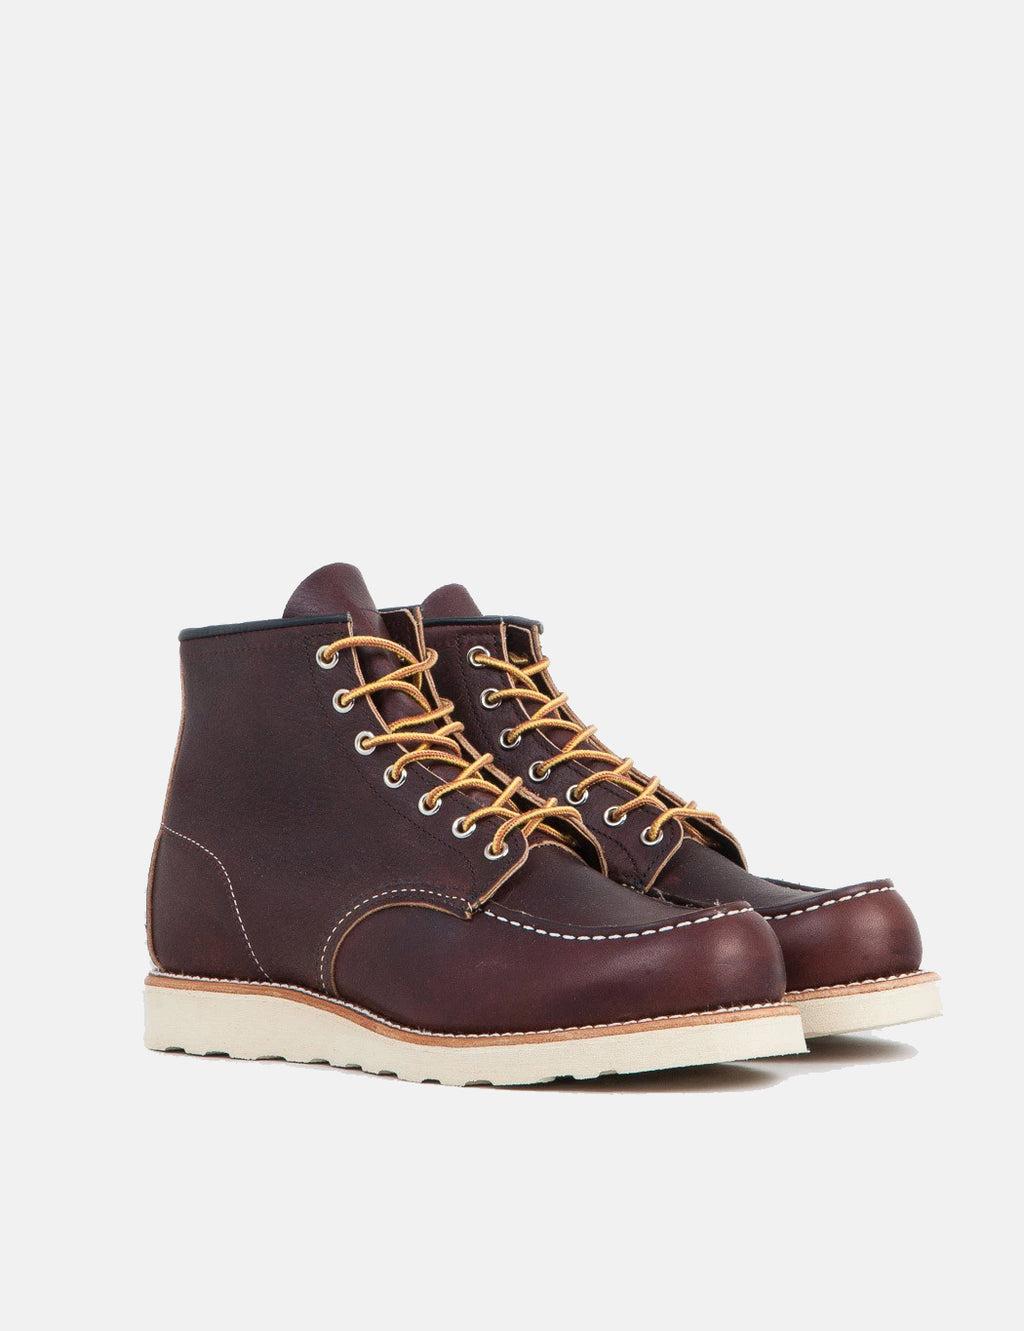 red wing boots heritage collection